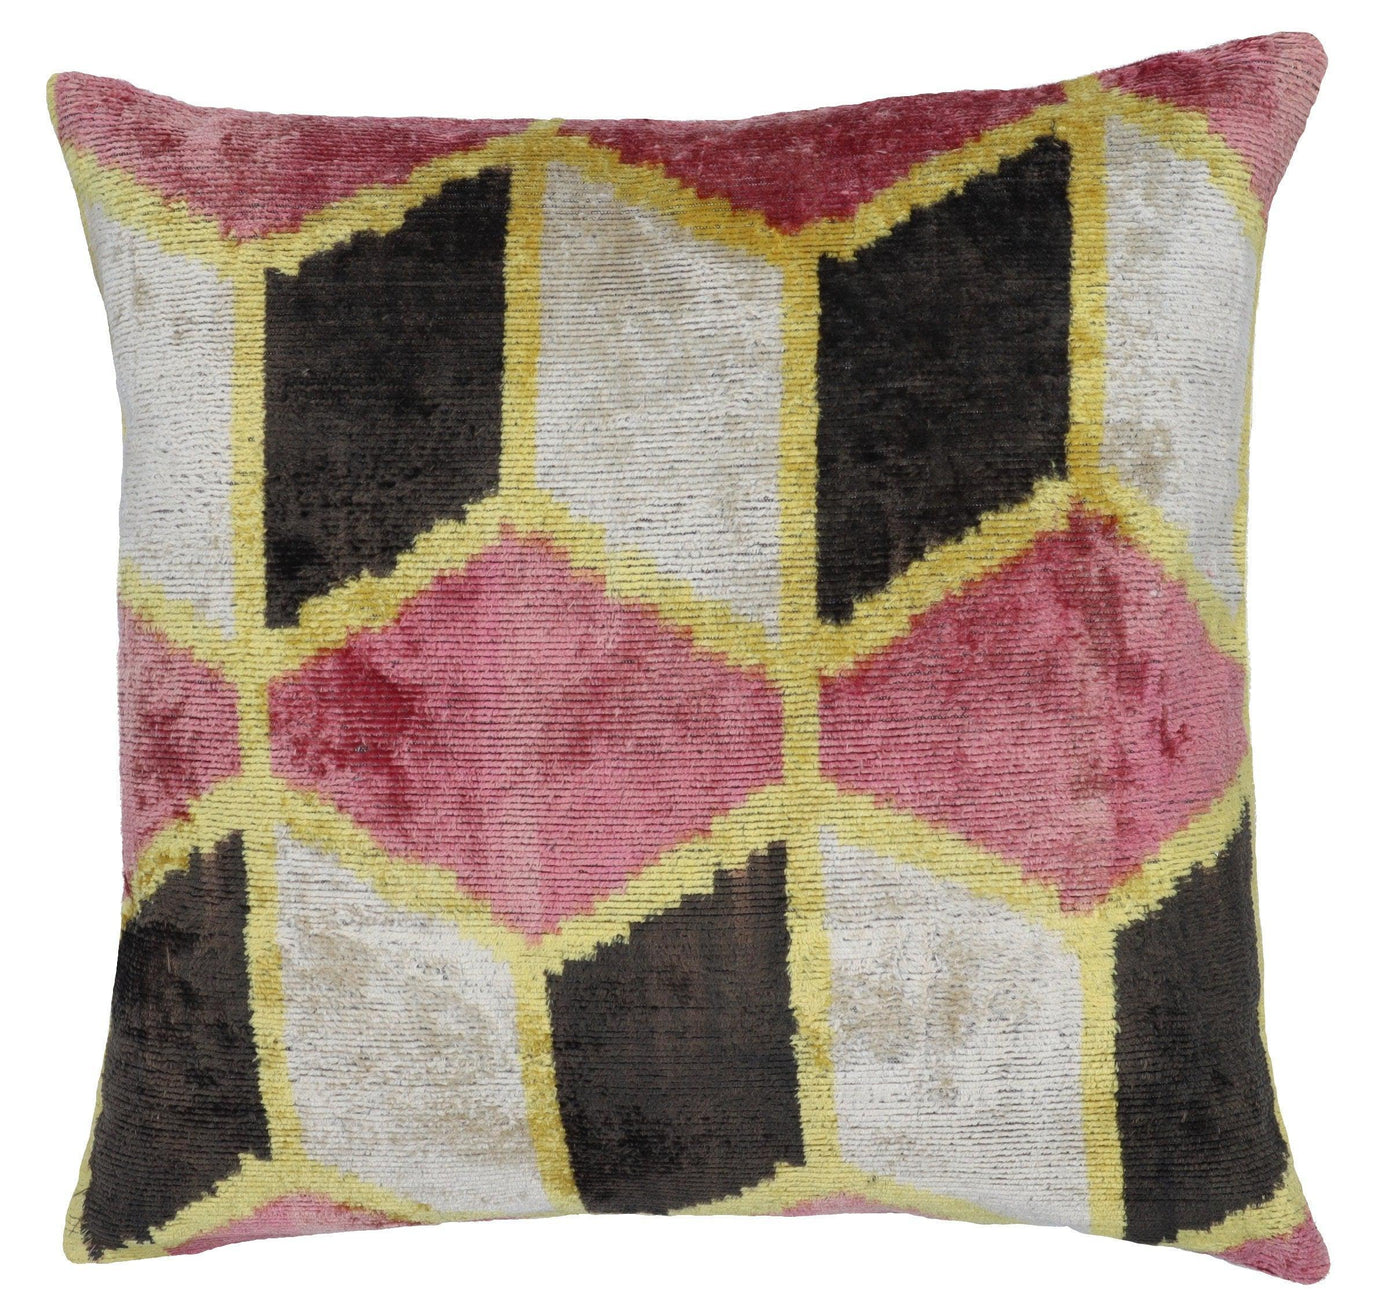 Canvello Handmade Dusty Pink Throw Pillows - 16x16 inch